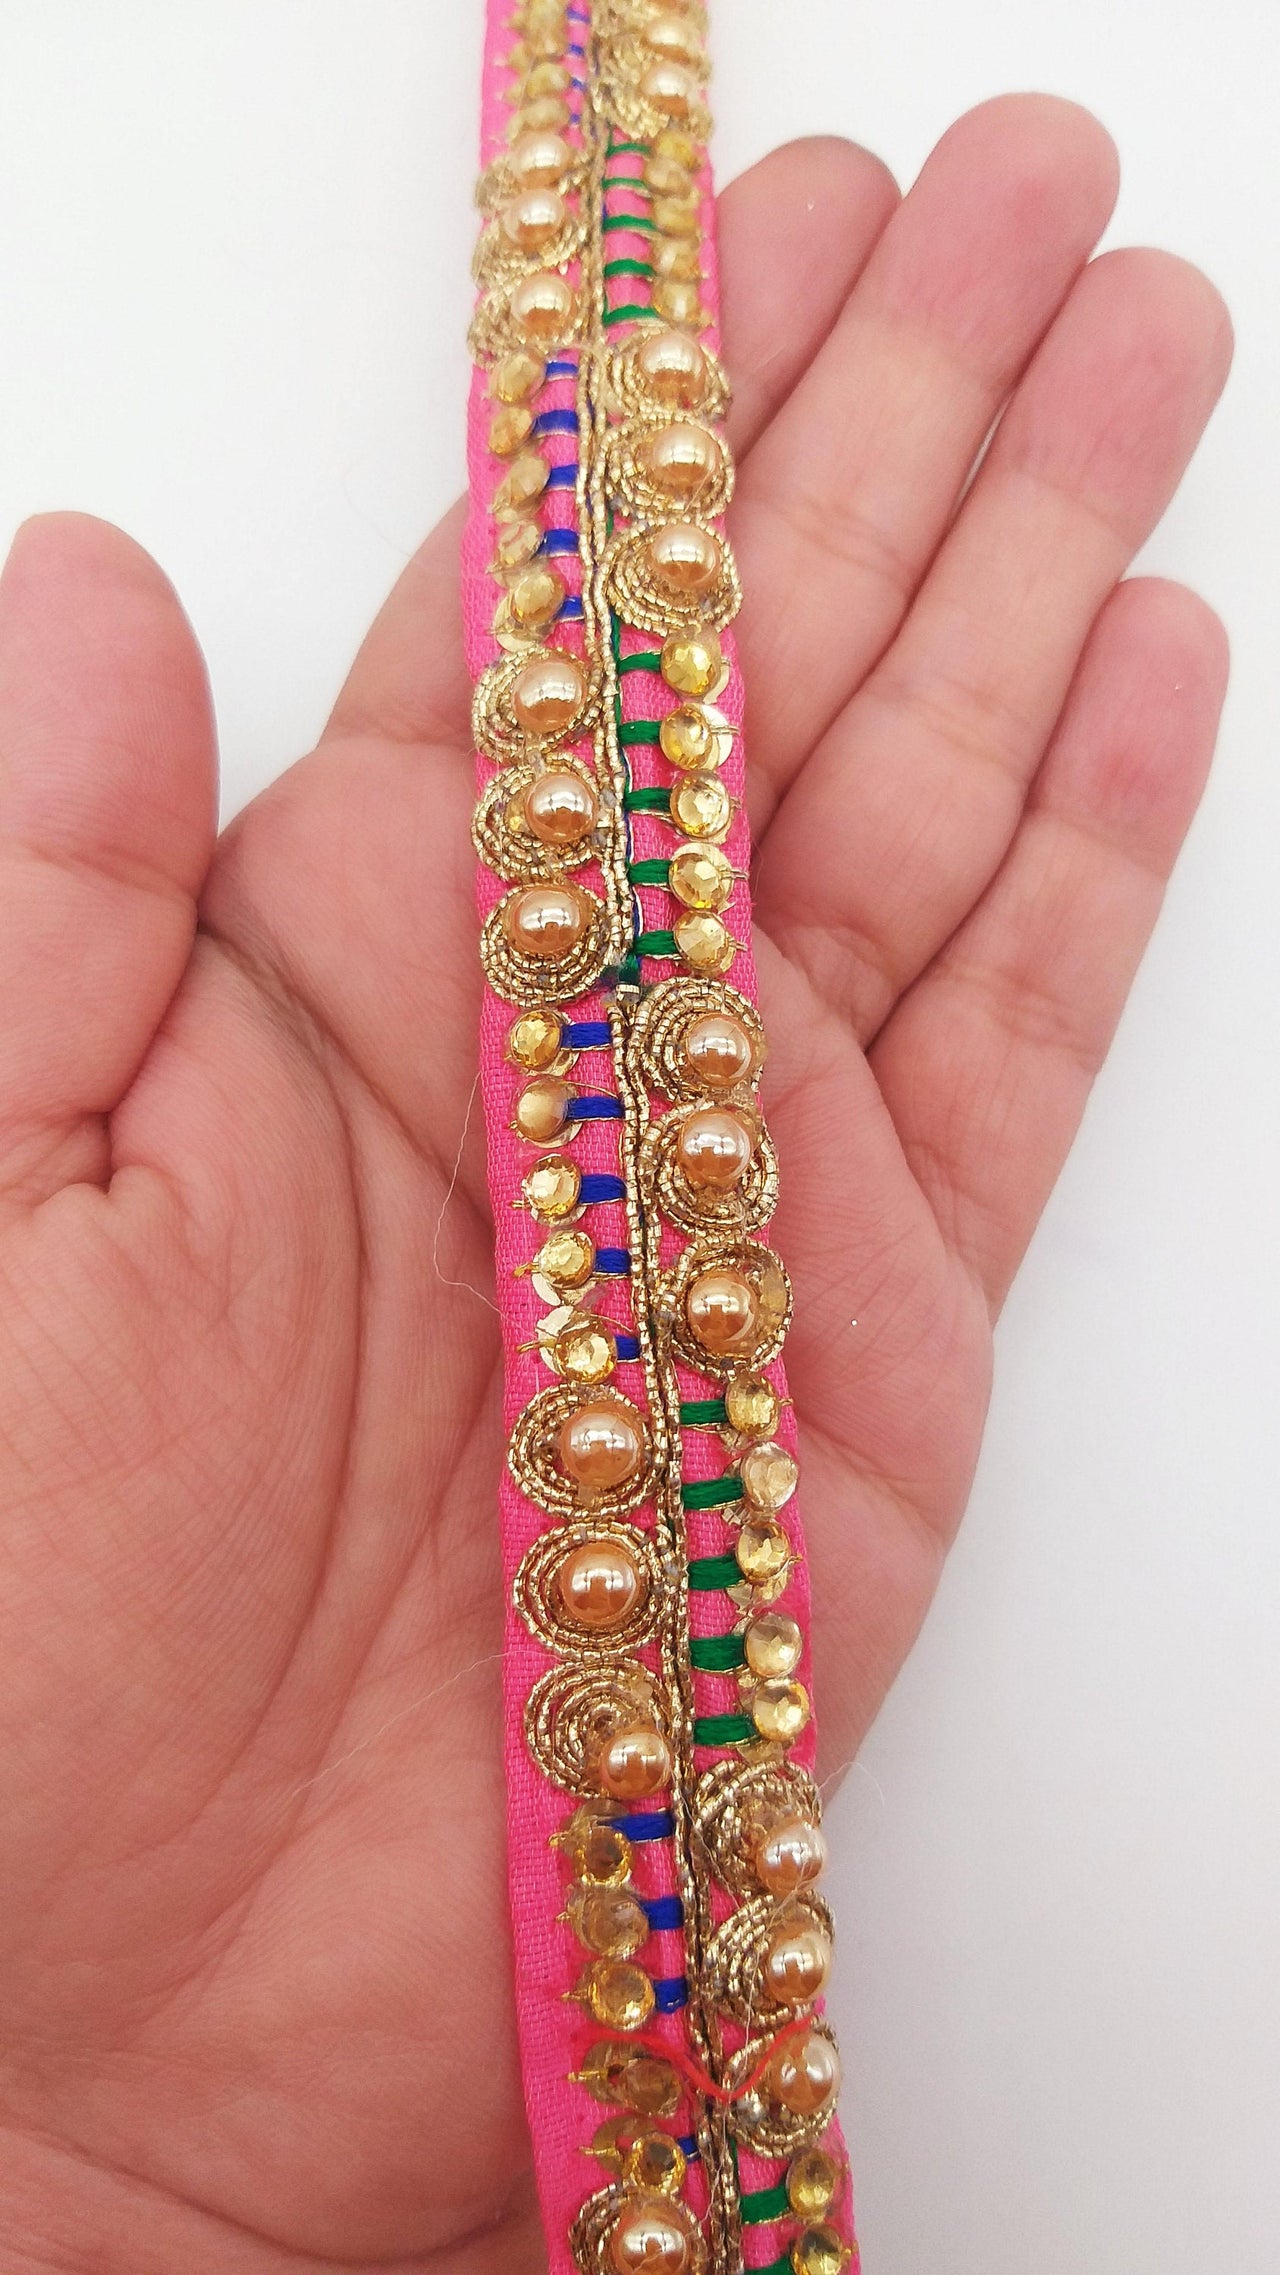 Cerise Pink Fabric Embroidered Trim with Gold Beads, Decorative Sari Trim, Trim By 3 Yards